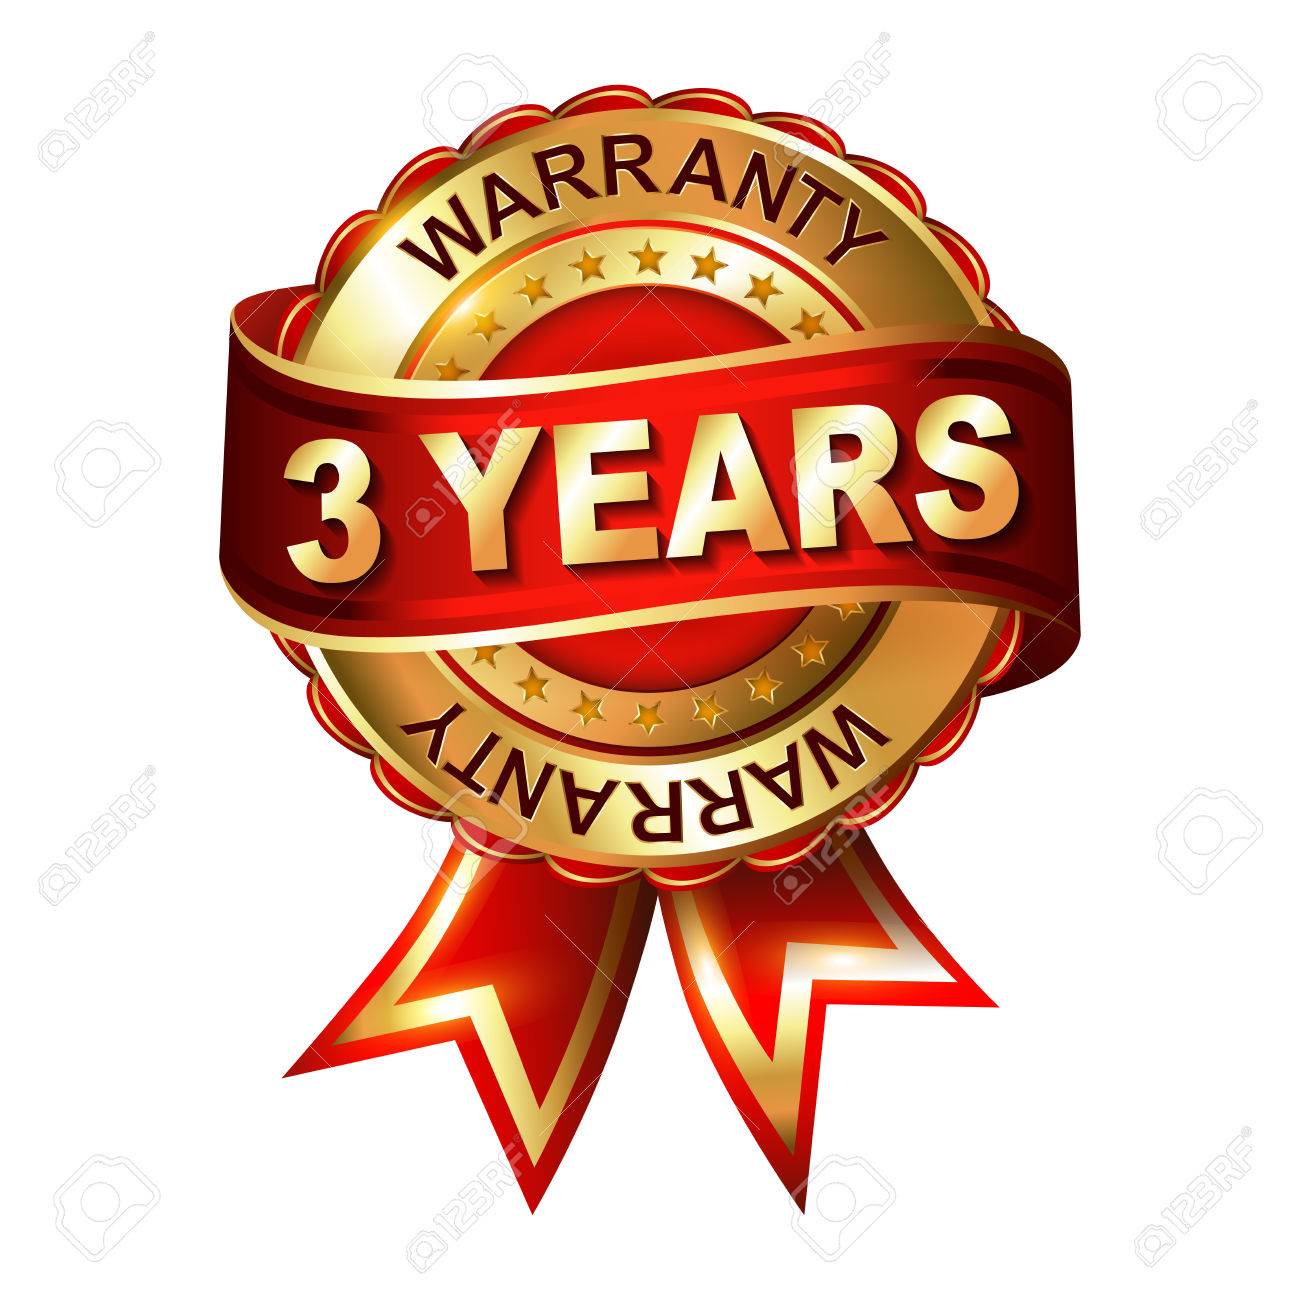 3 Year Extended Warranty For Televisions Under $6500